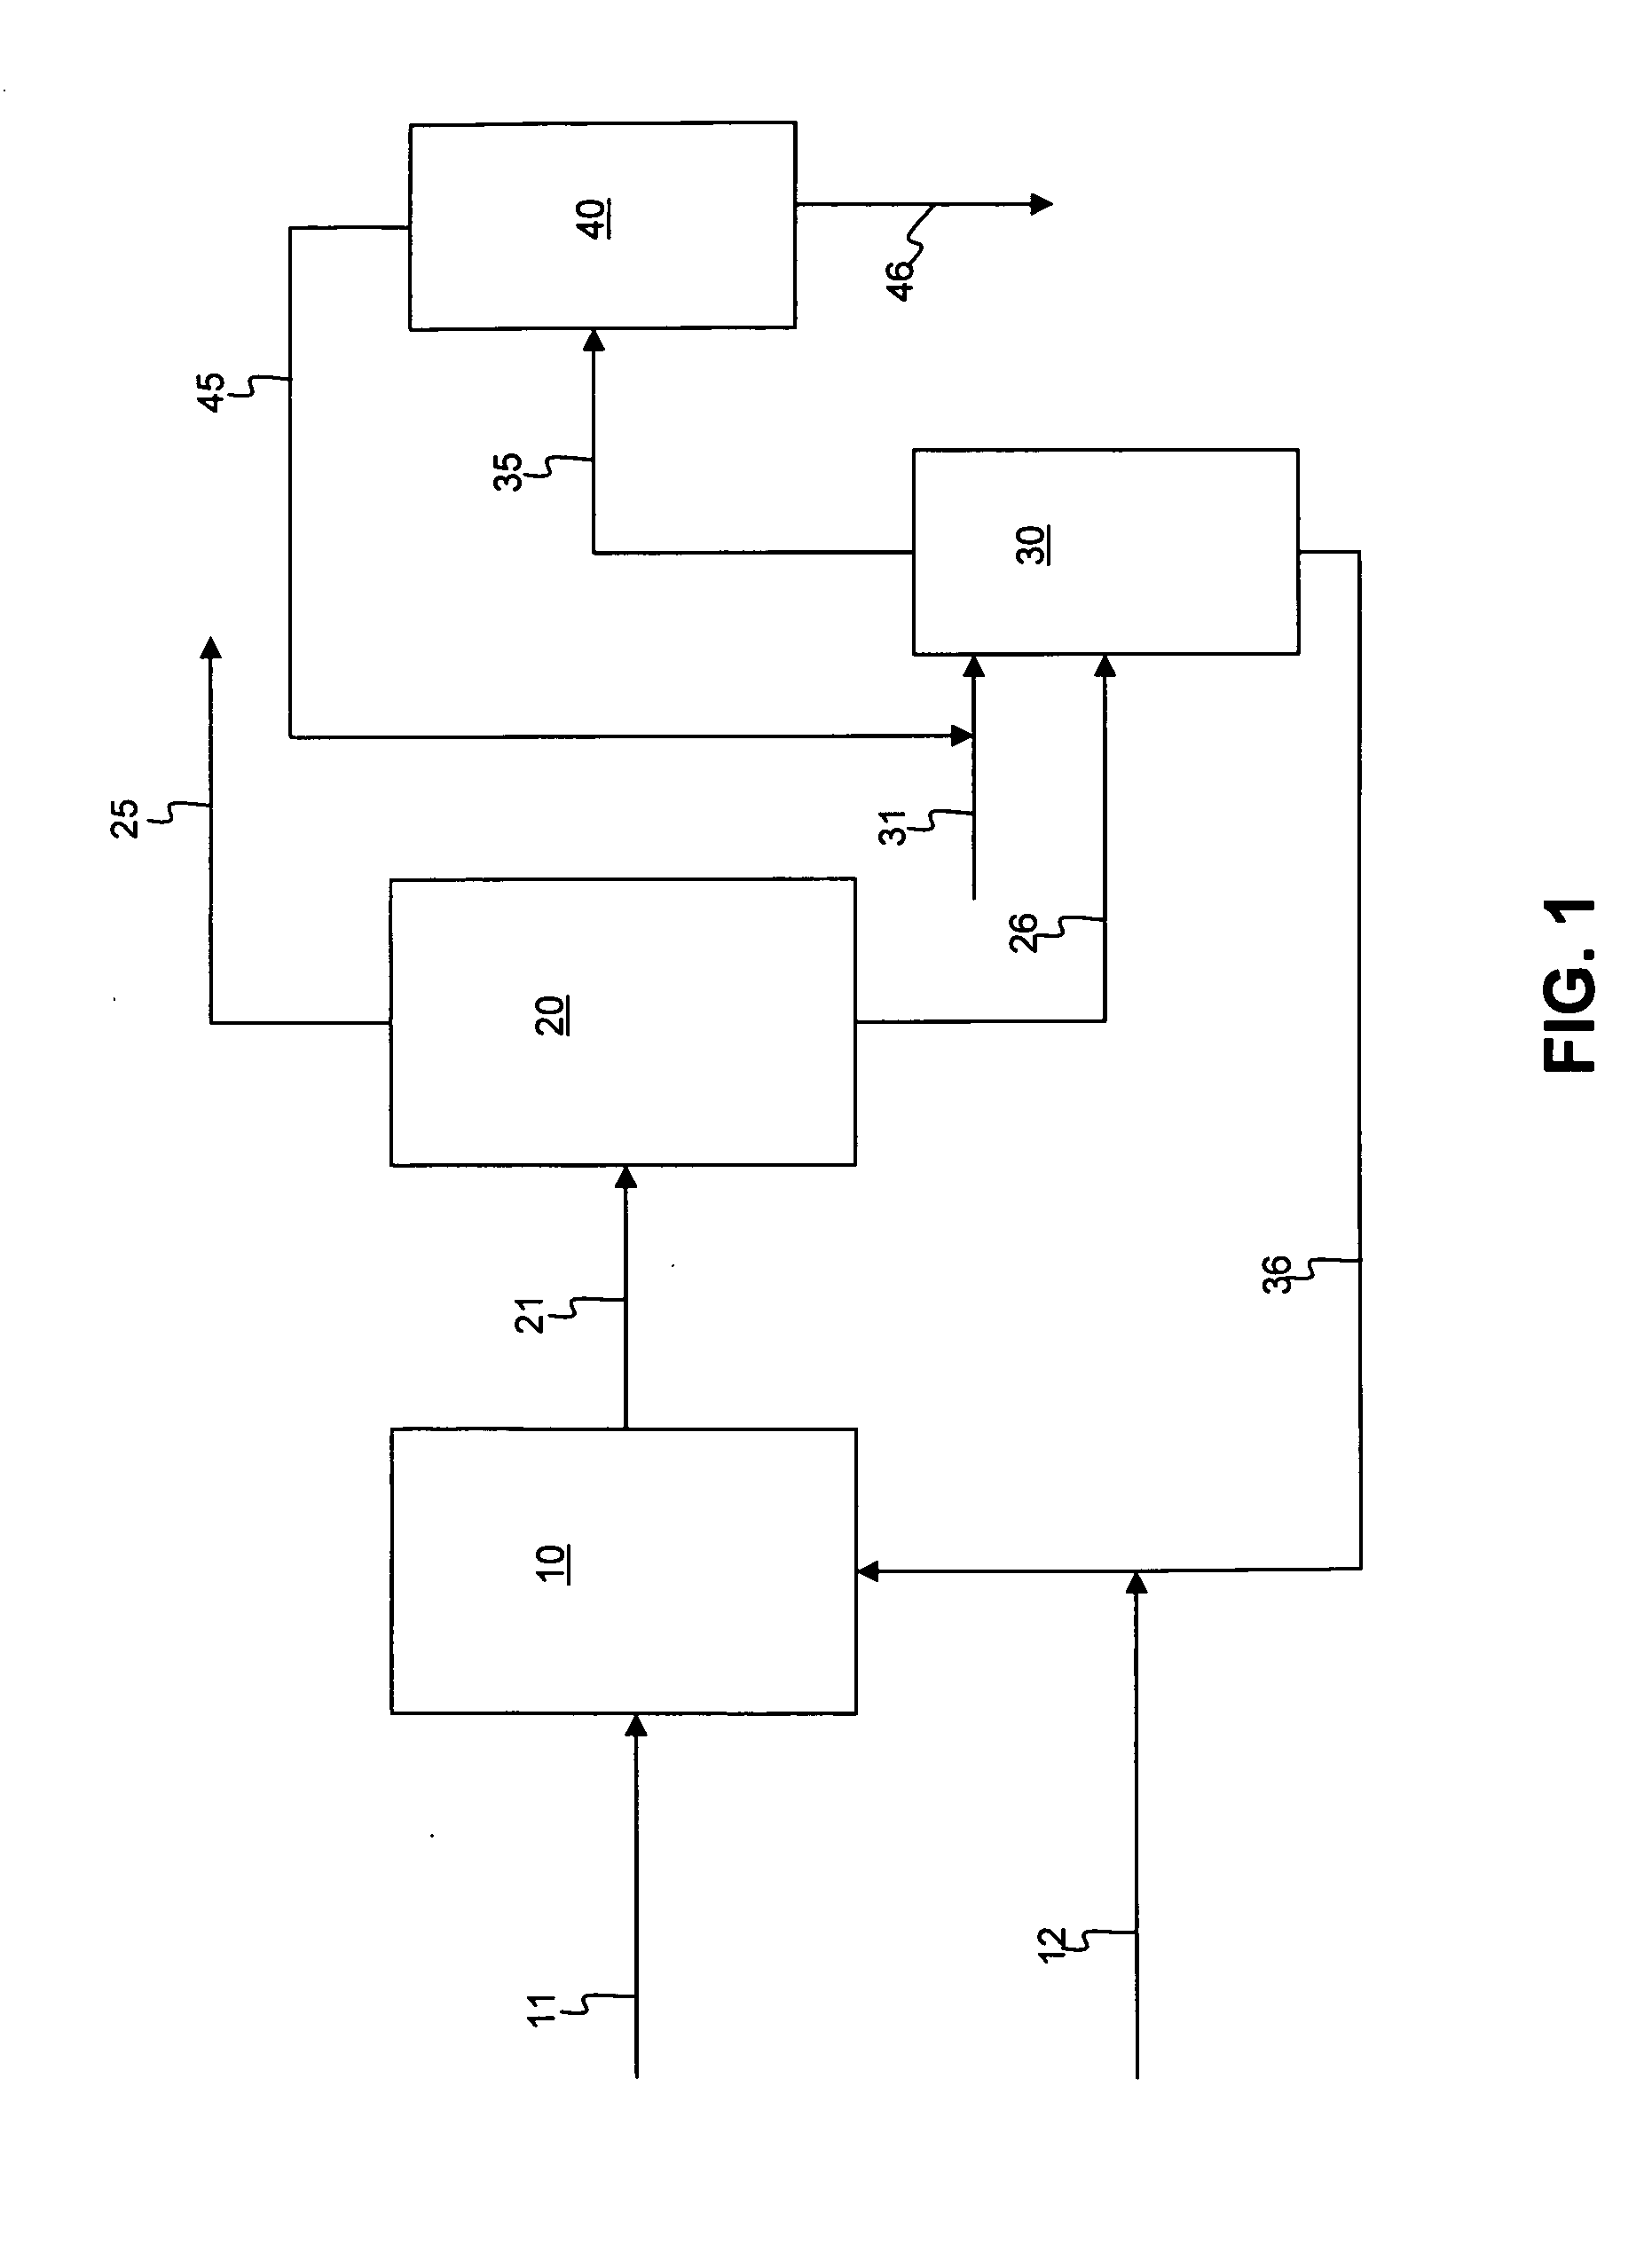 Process for upgrading hydrocarbon feedstocks using solid adsorbent and membrane separation of treated product stream